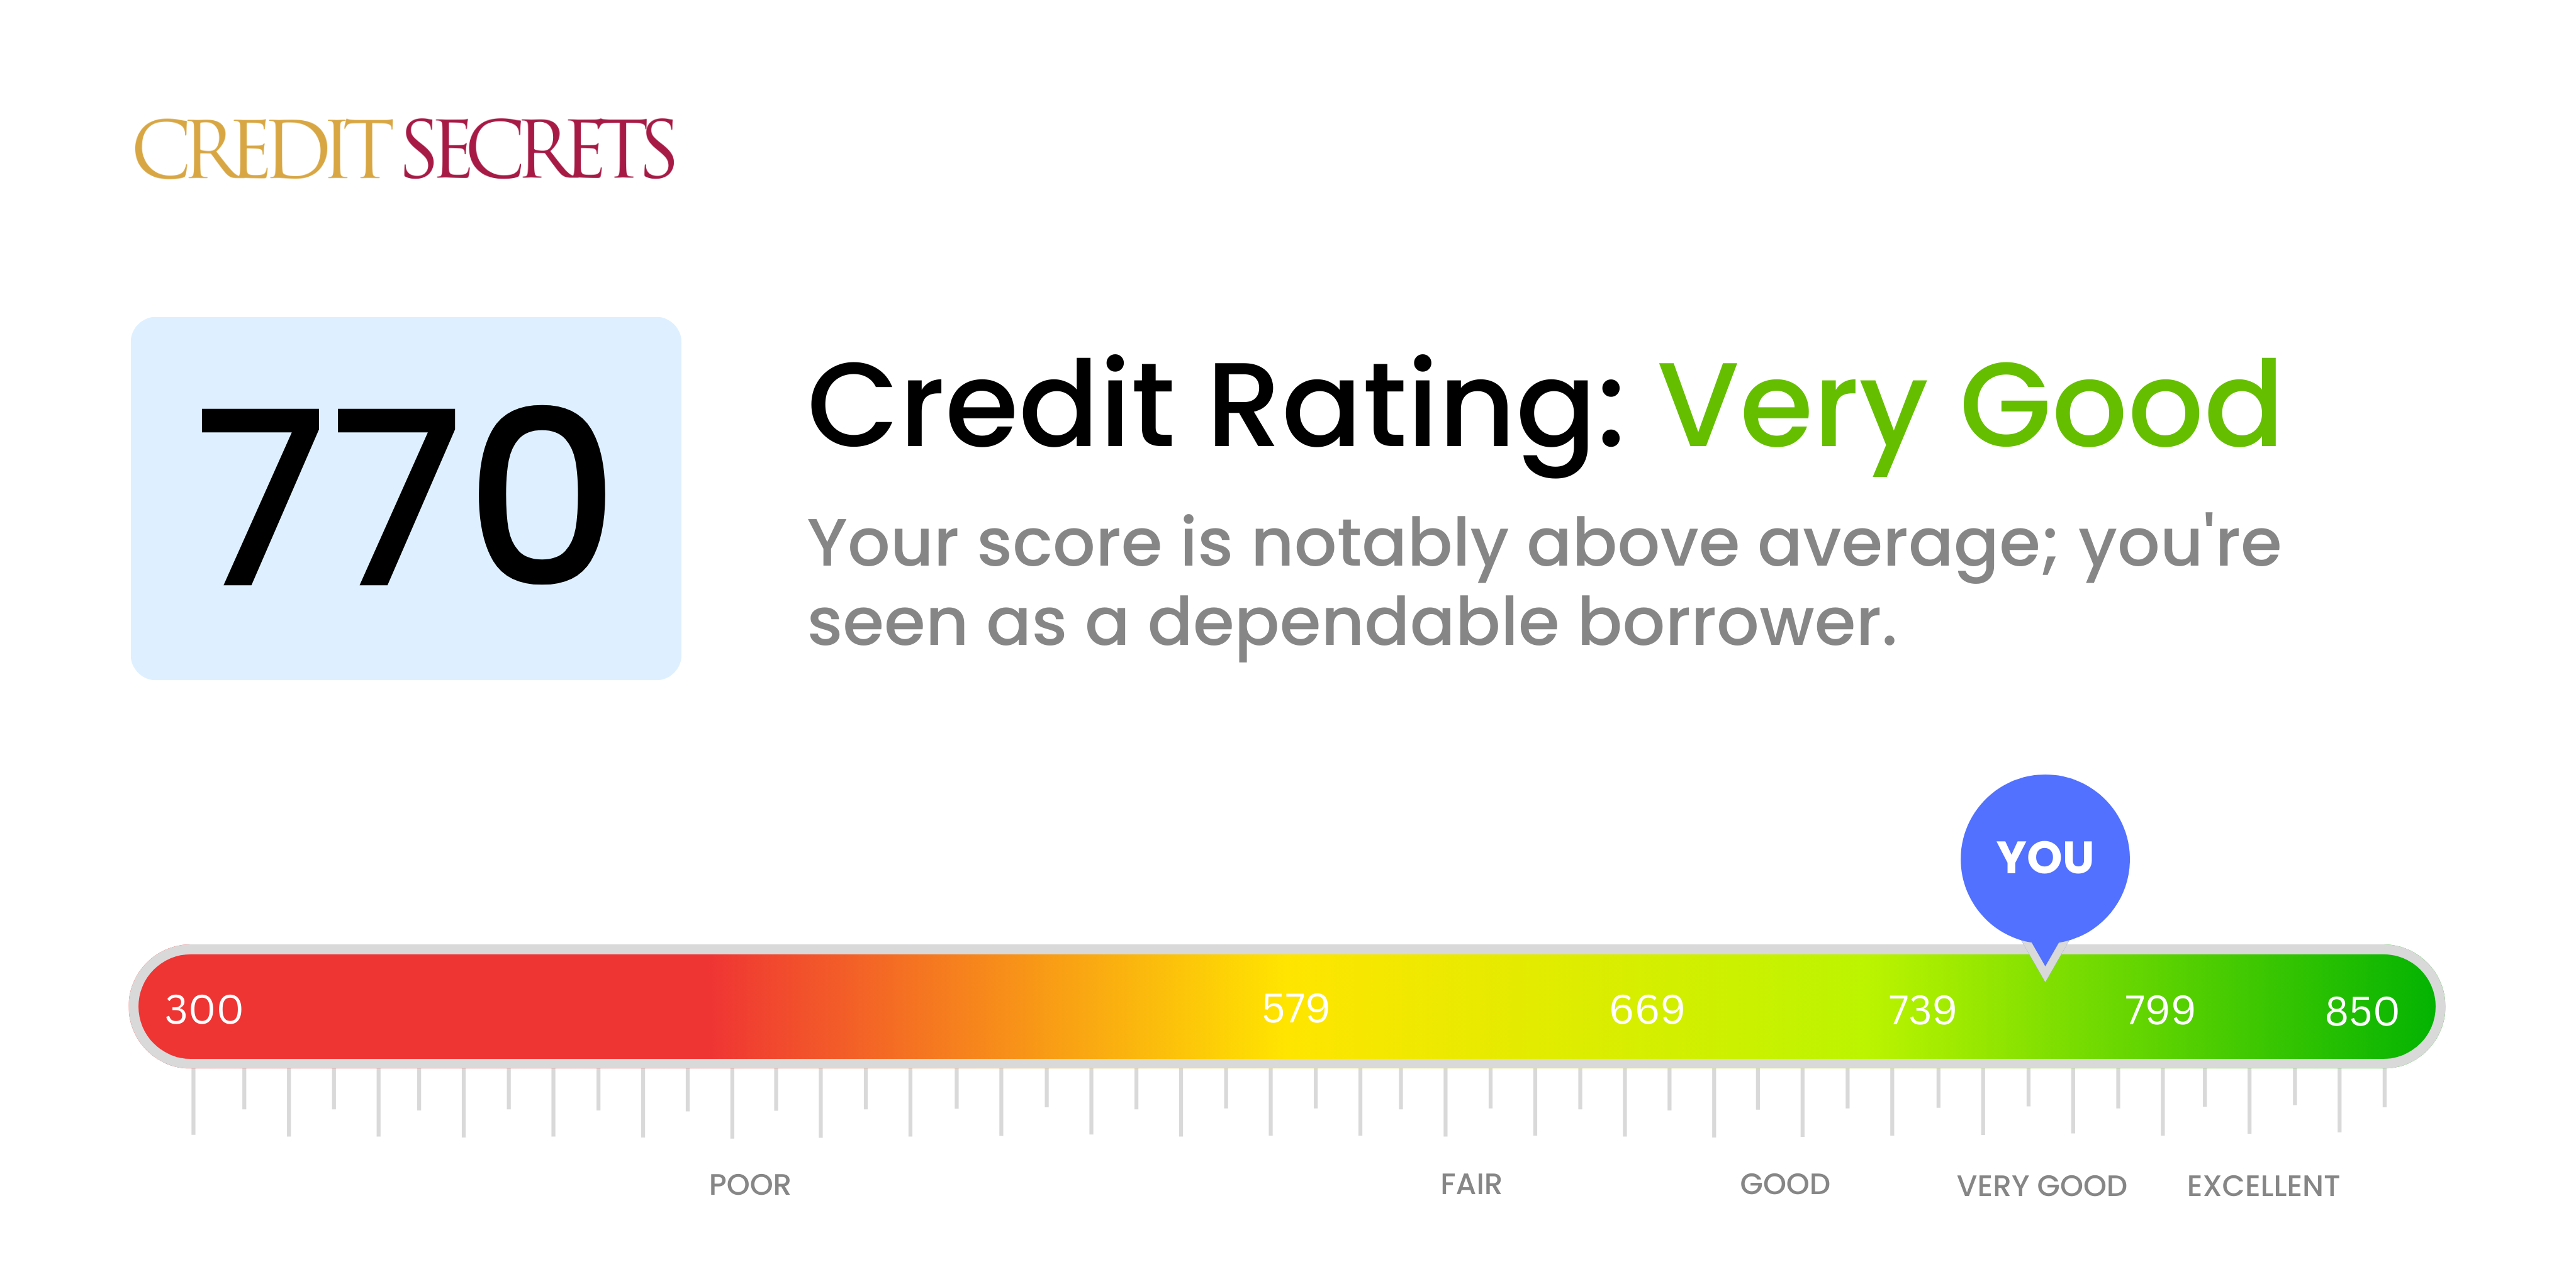 Is 770 a good credit score?